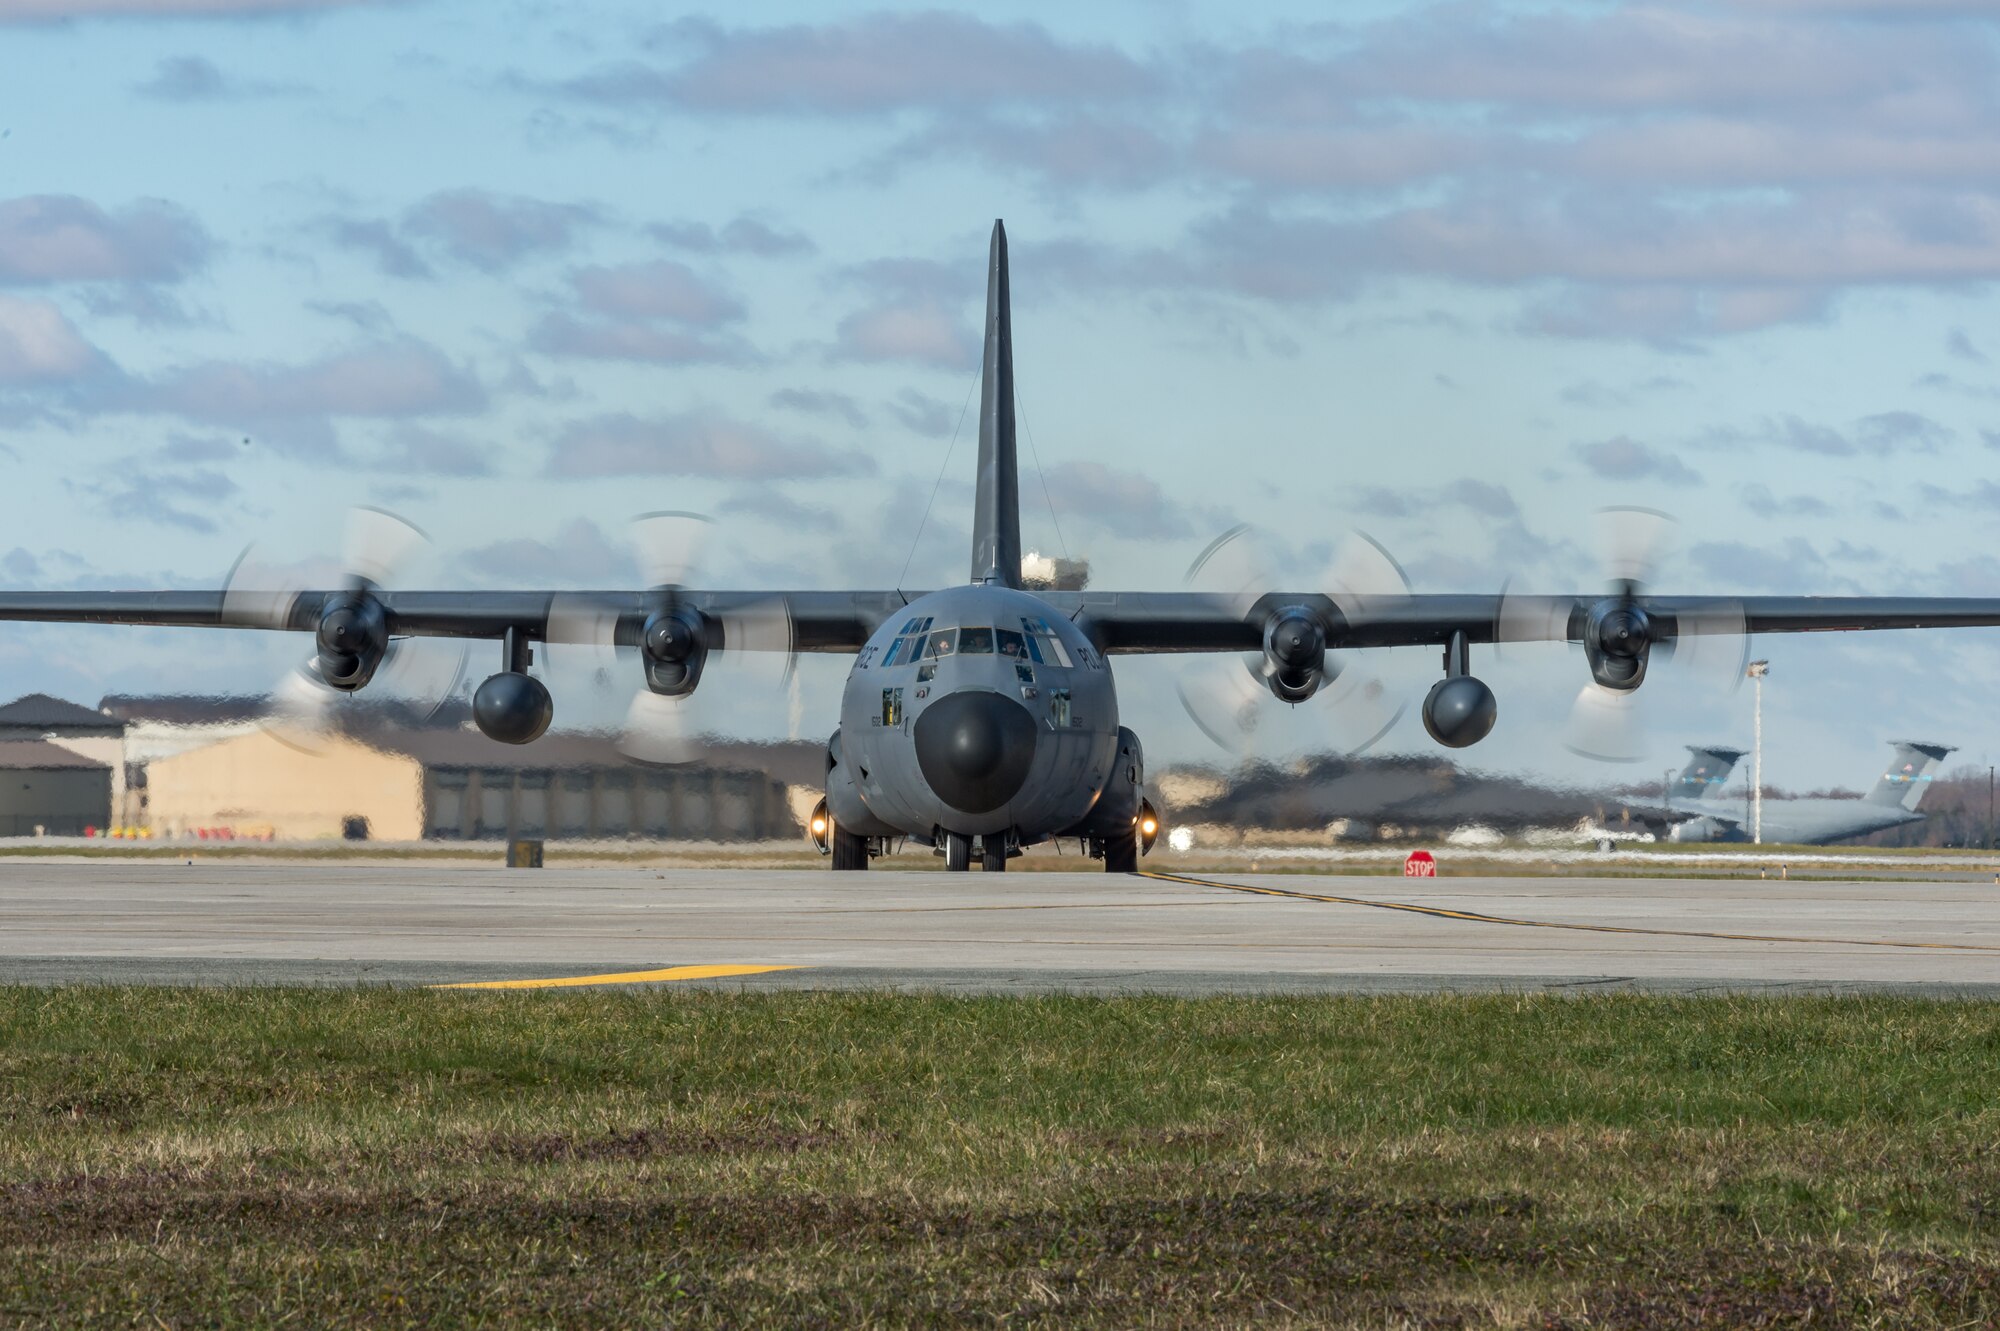 As part of a foreign military sales mission, a Polish air force C-130E Hercules taxis to a parking spot after landing to be unloaded by Airmen from the 436th Aerial Port Squadron Dec. 17, 2020, at Dover Air Force Base, Delaware. The United States and Poland have enjoyed warm bilateral relations since 1989. Poland is a stalwart NATO ally, with which the U.S. partners closely on NATO capabilities, counterterrorism, nonproliferation, missile defense and regional cooperation in Central and Eastern Europe. Due to its strategic location, Dover AFB supports approximately $3.5 billion worth of foreign military sales annually. (U.S. Air Force photo by Roland Balik)